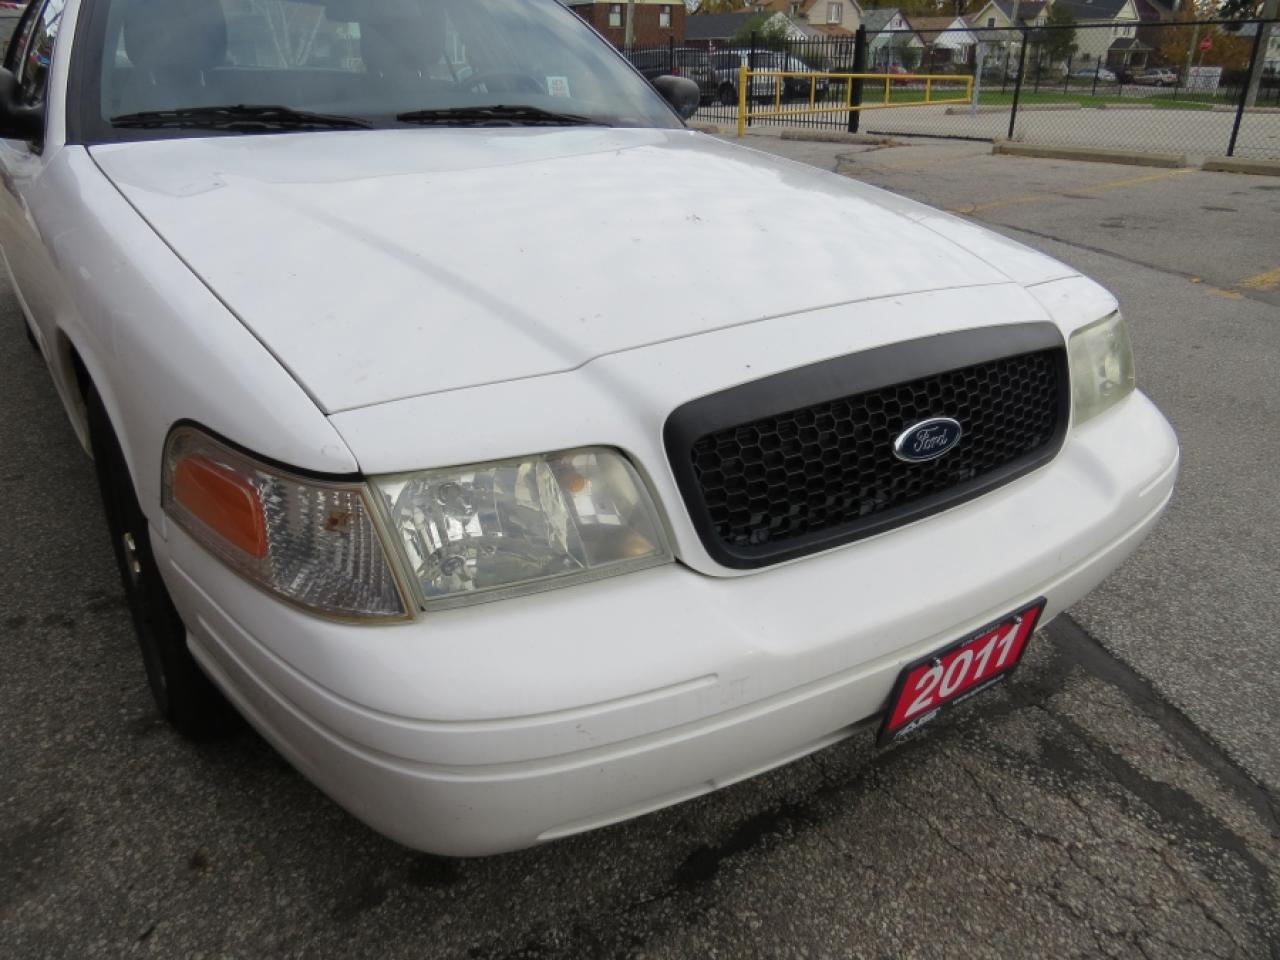 Used 2011 Ford Crown Victoria P71 Police Interceptor For